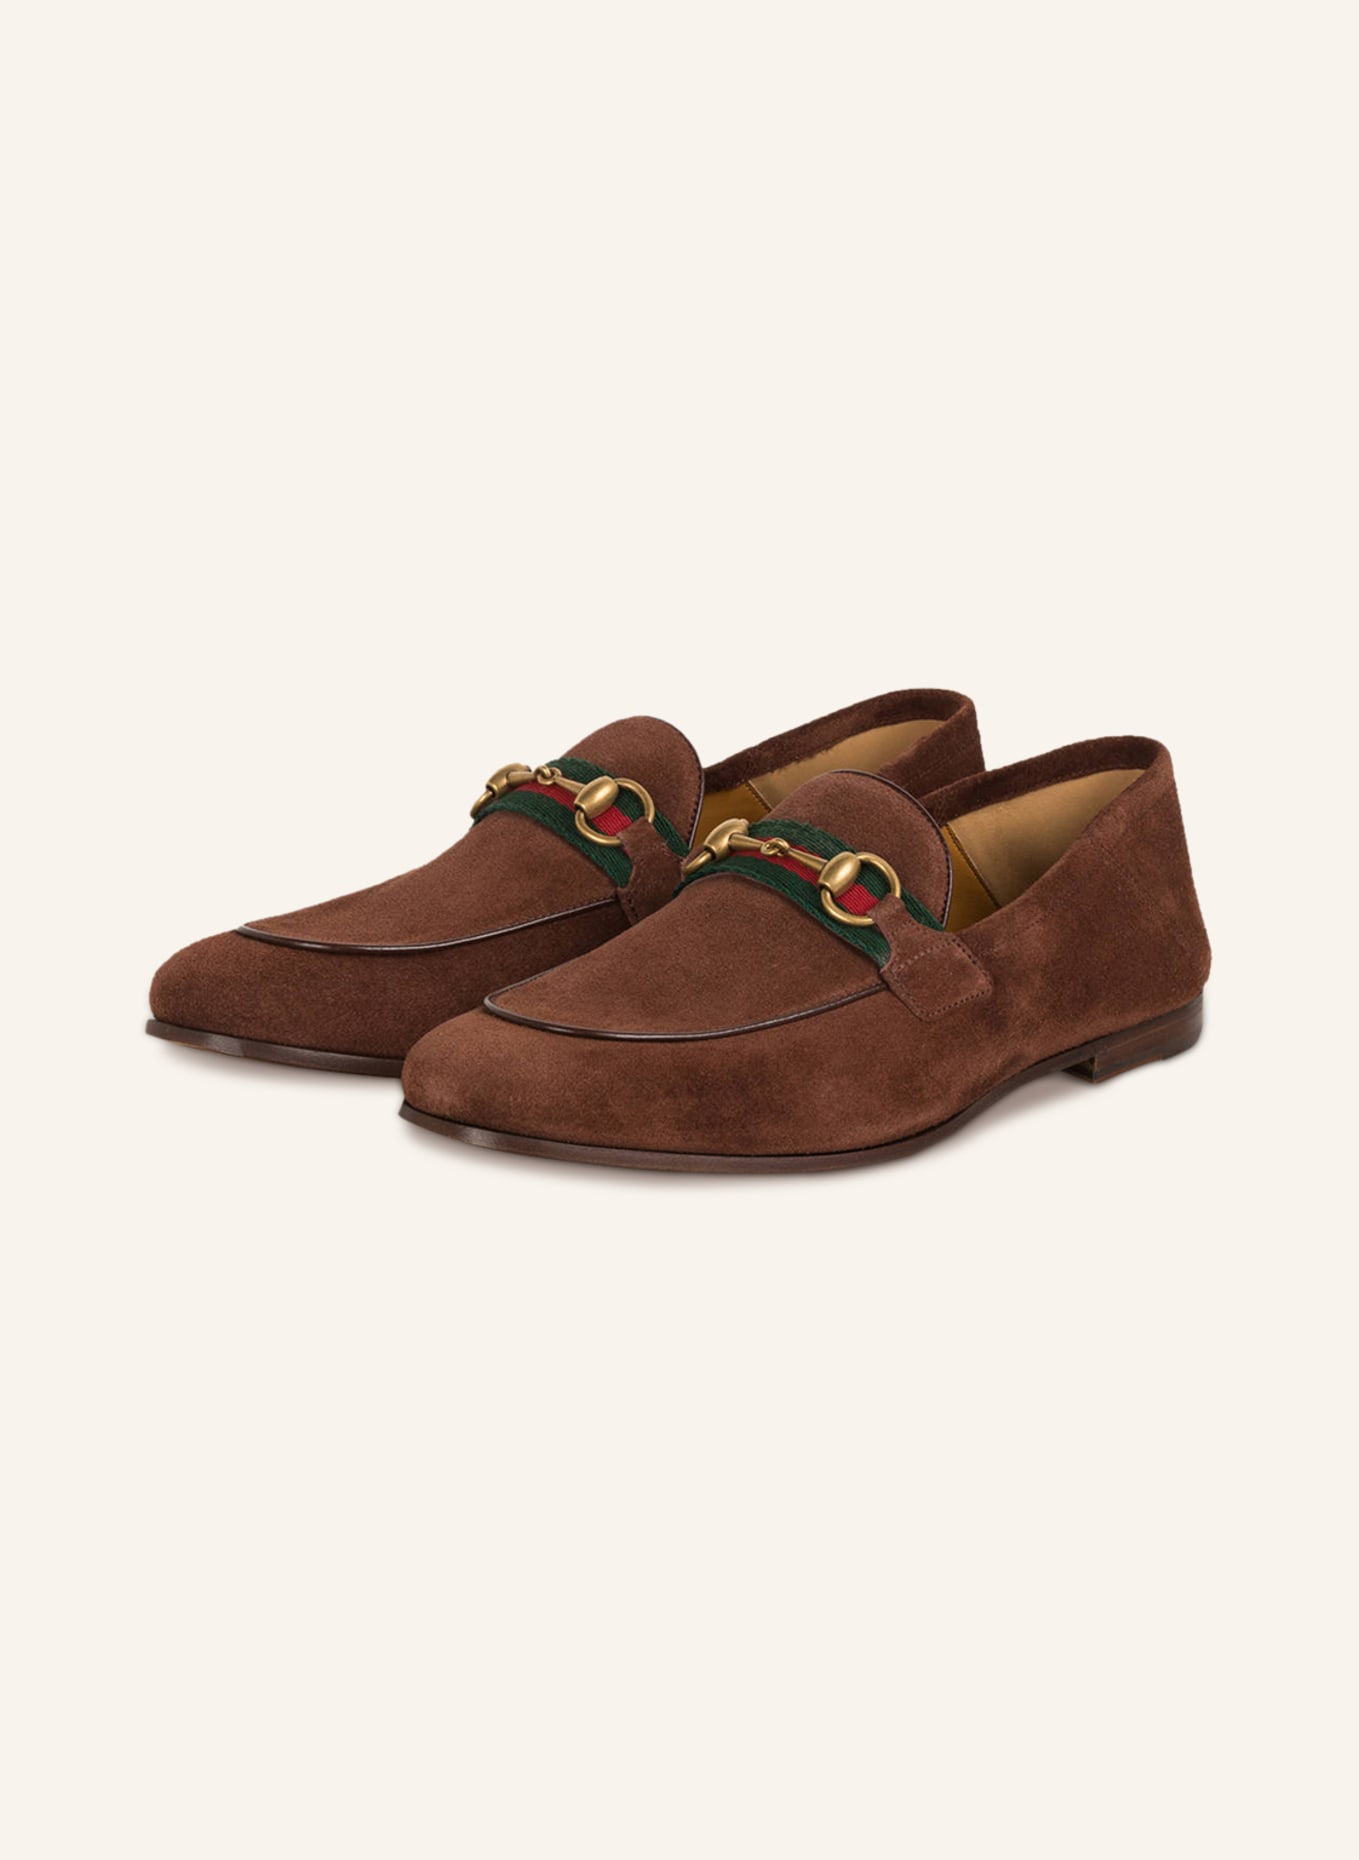 GUCCI Loafers BRIXTON with flexible section in brown